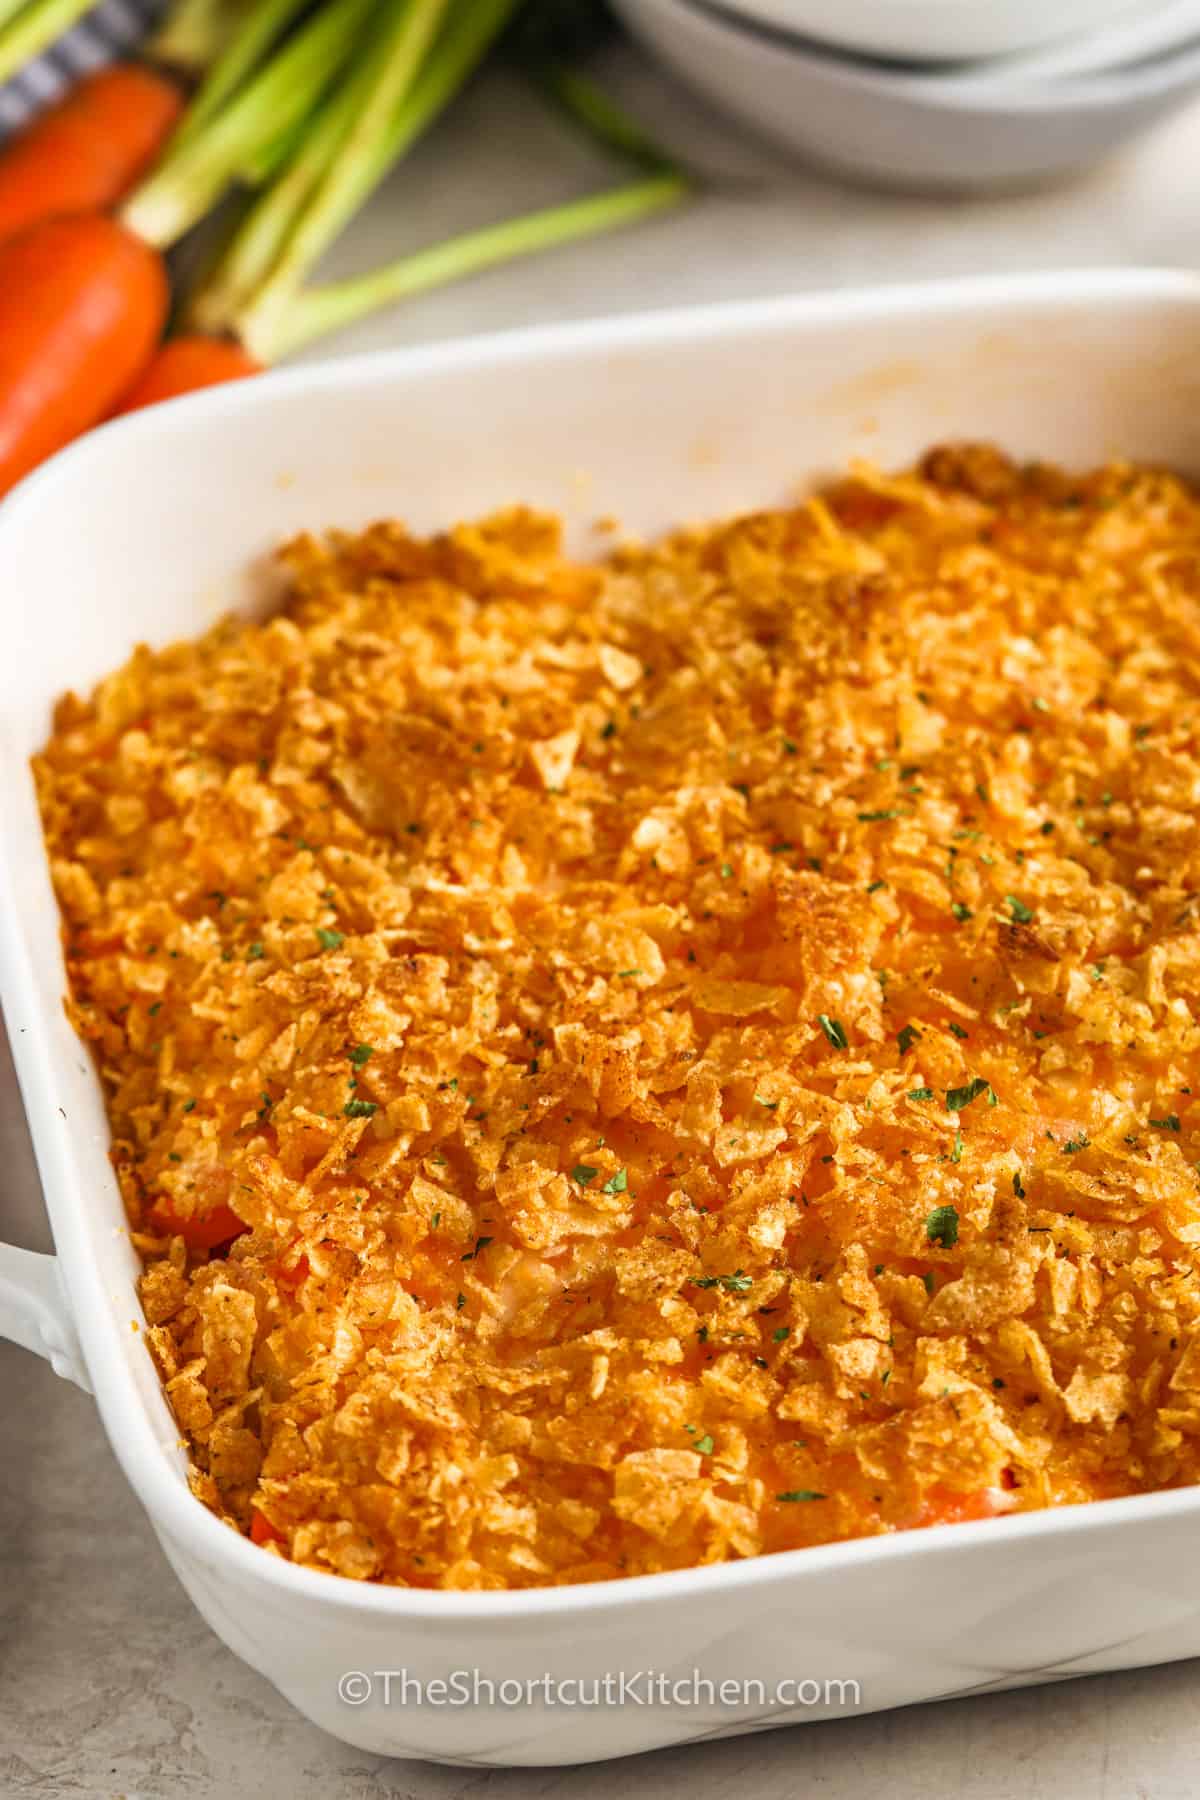 baked Carrot Casserole in the dish